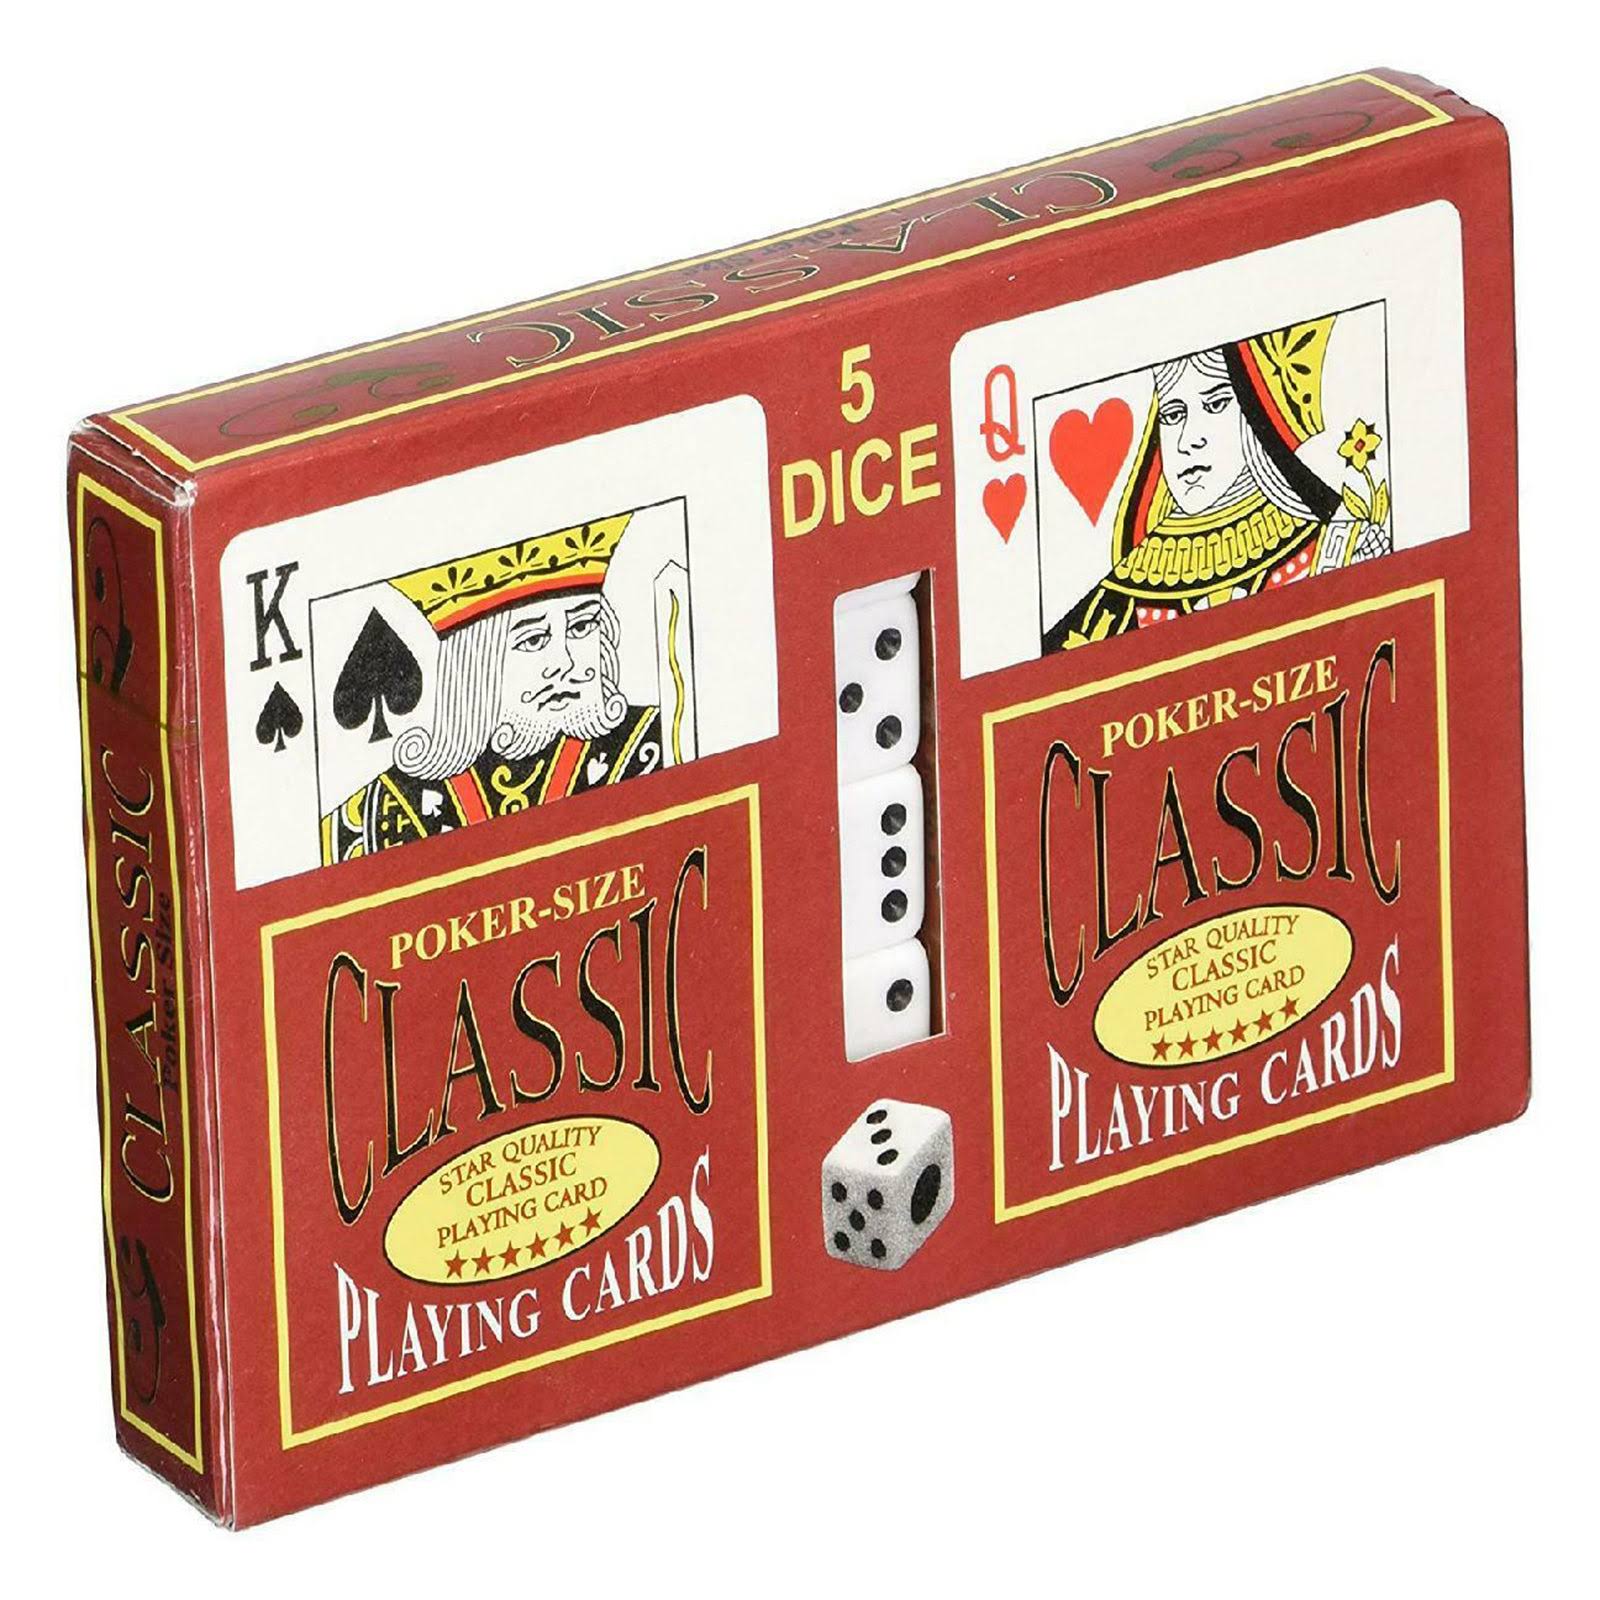 Star Quality Classic Game Playing 2 Deck Cards and 5 Dice Set